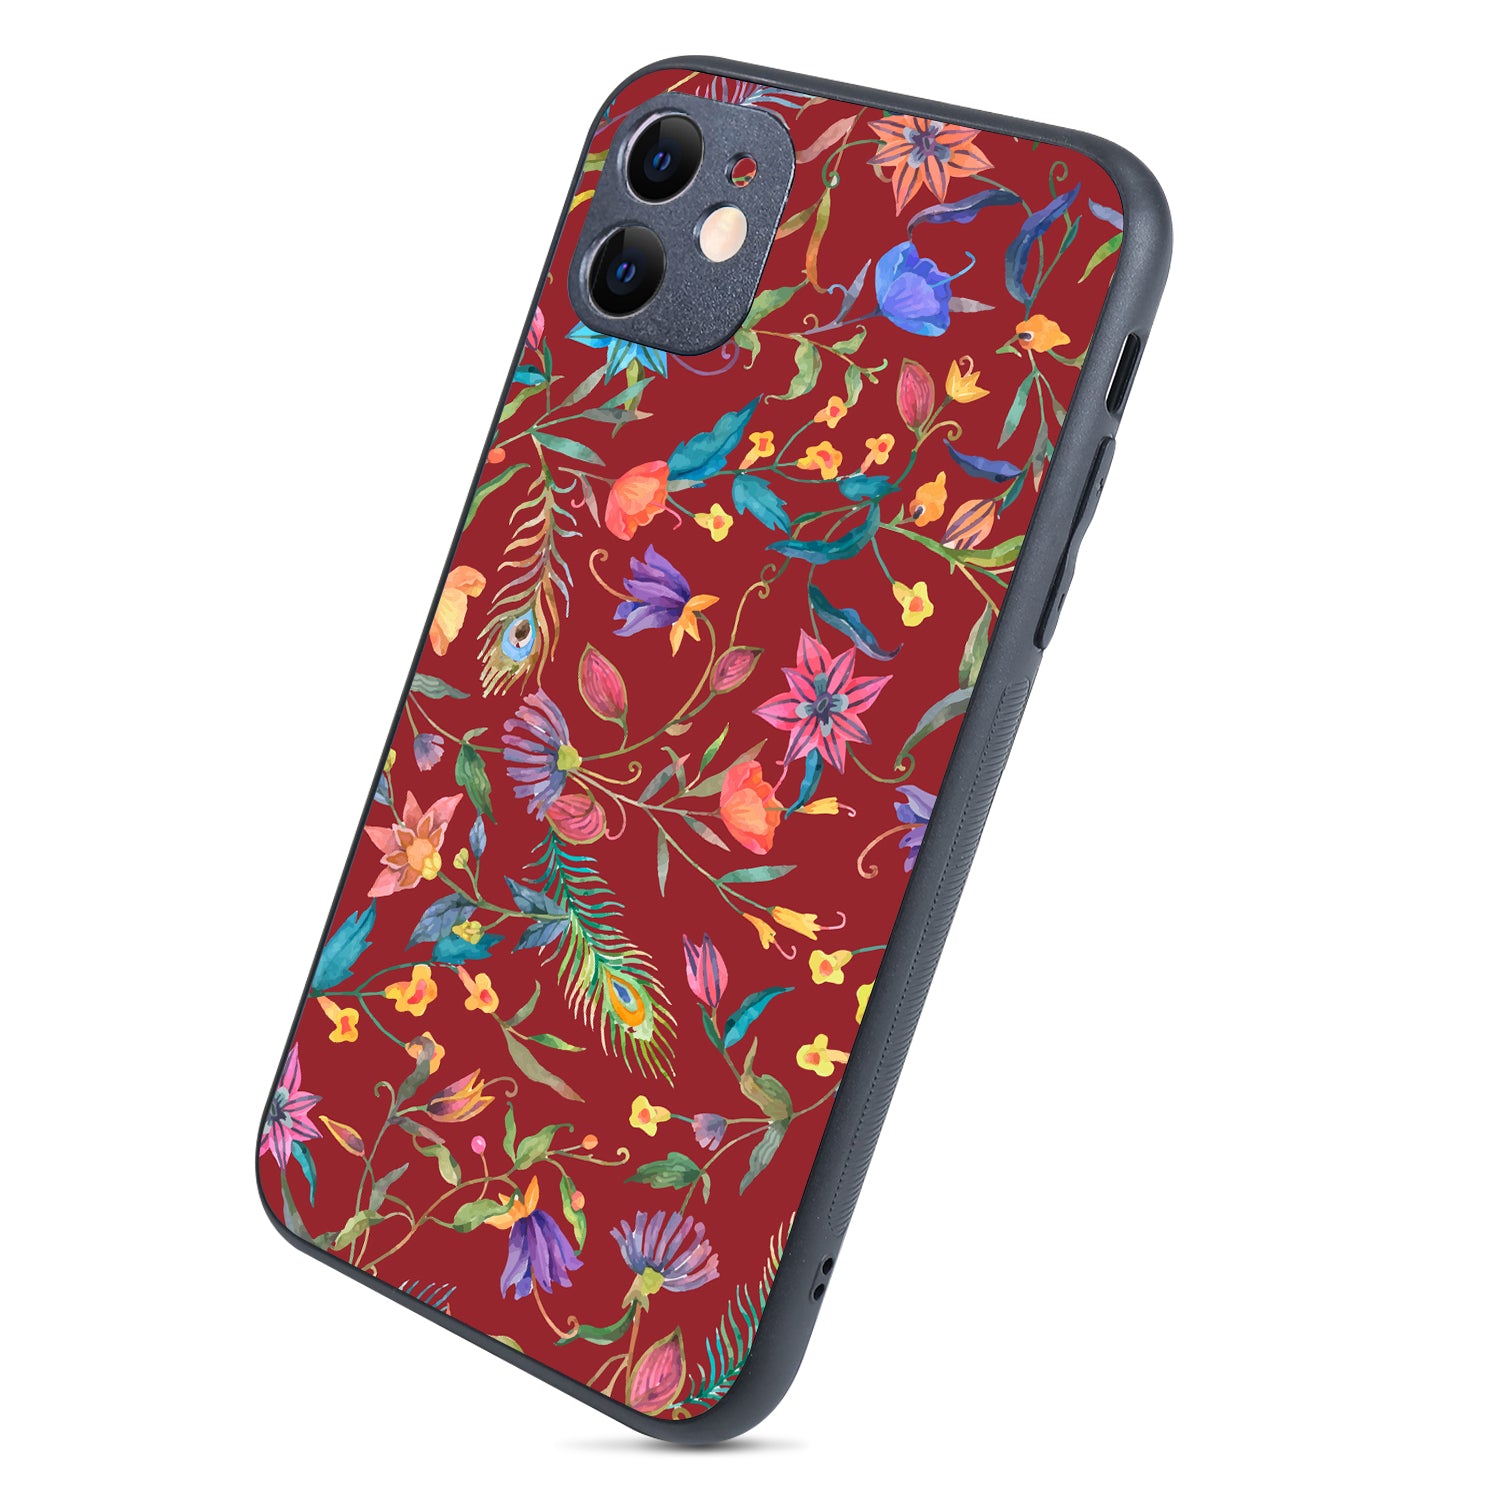 Red Doodle Floral iPhone 11 Case